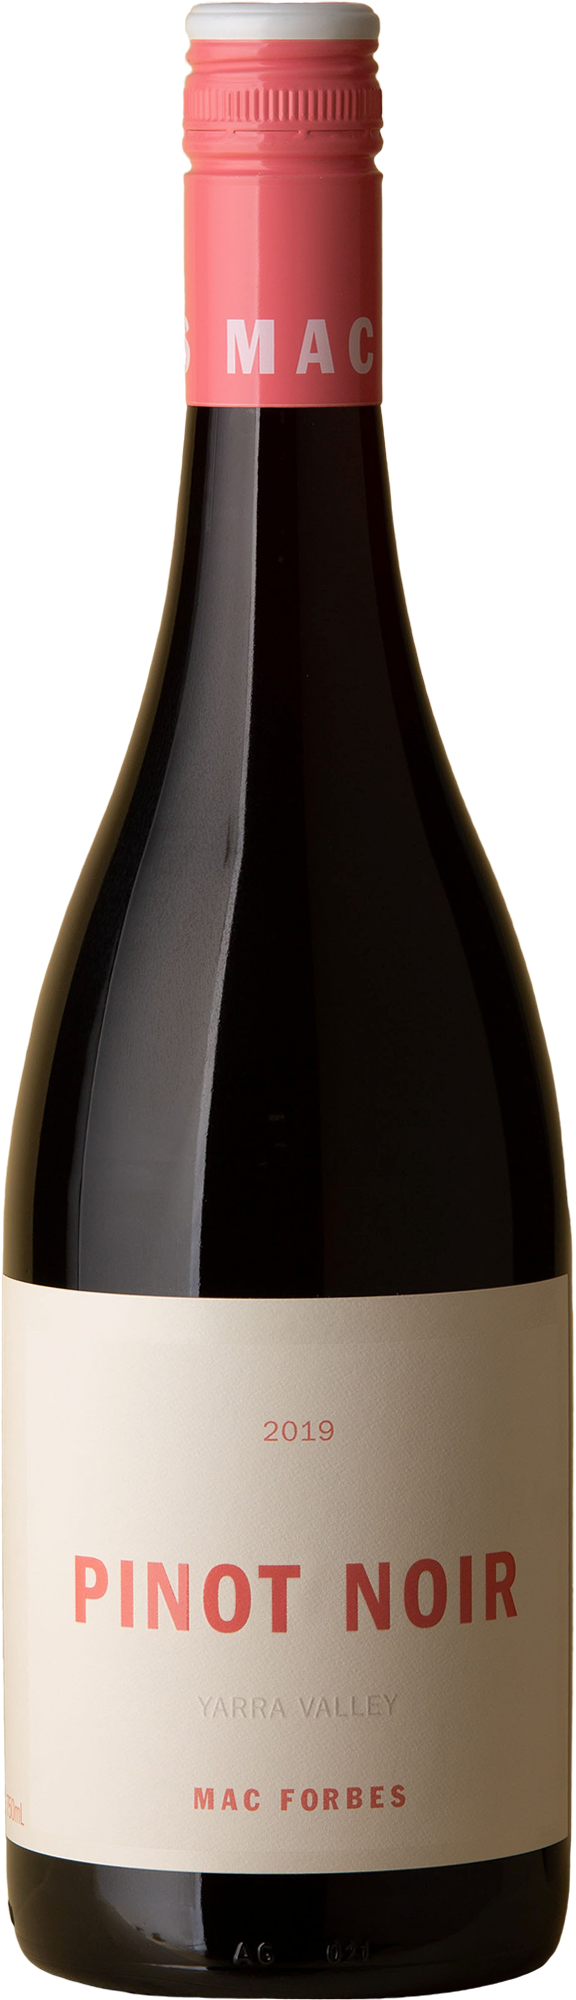 Mac Forbes - Yarra Valley Pinot Noir 2020 Red Wine